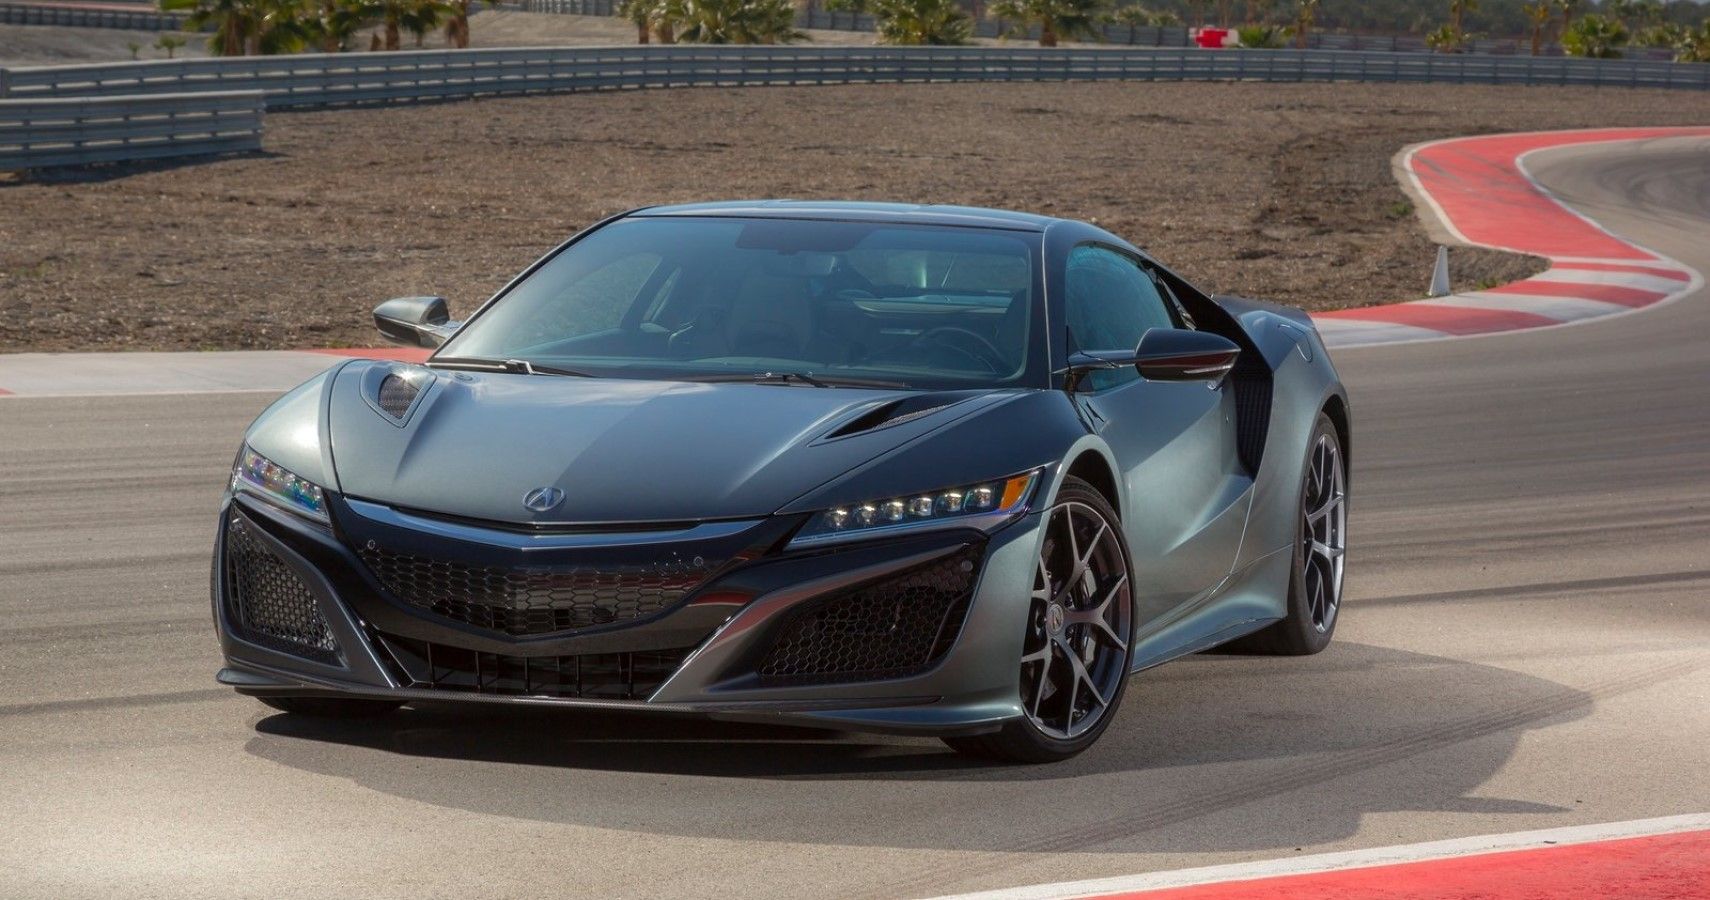 2017 Acura NSX front third quarter hd view on racetrack